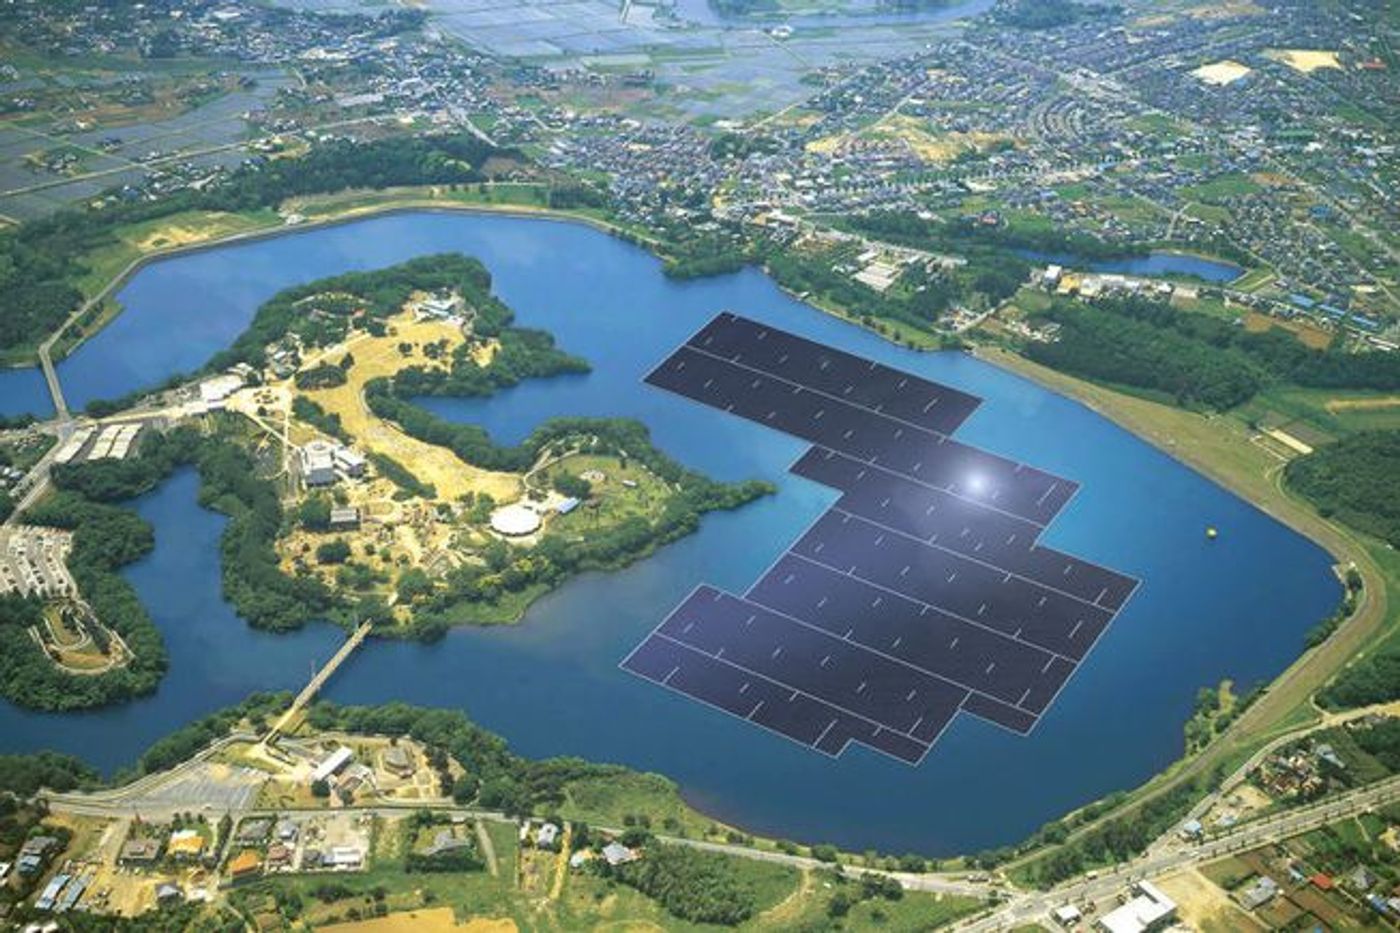 A rendition of the completed solar farm in Japan.